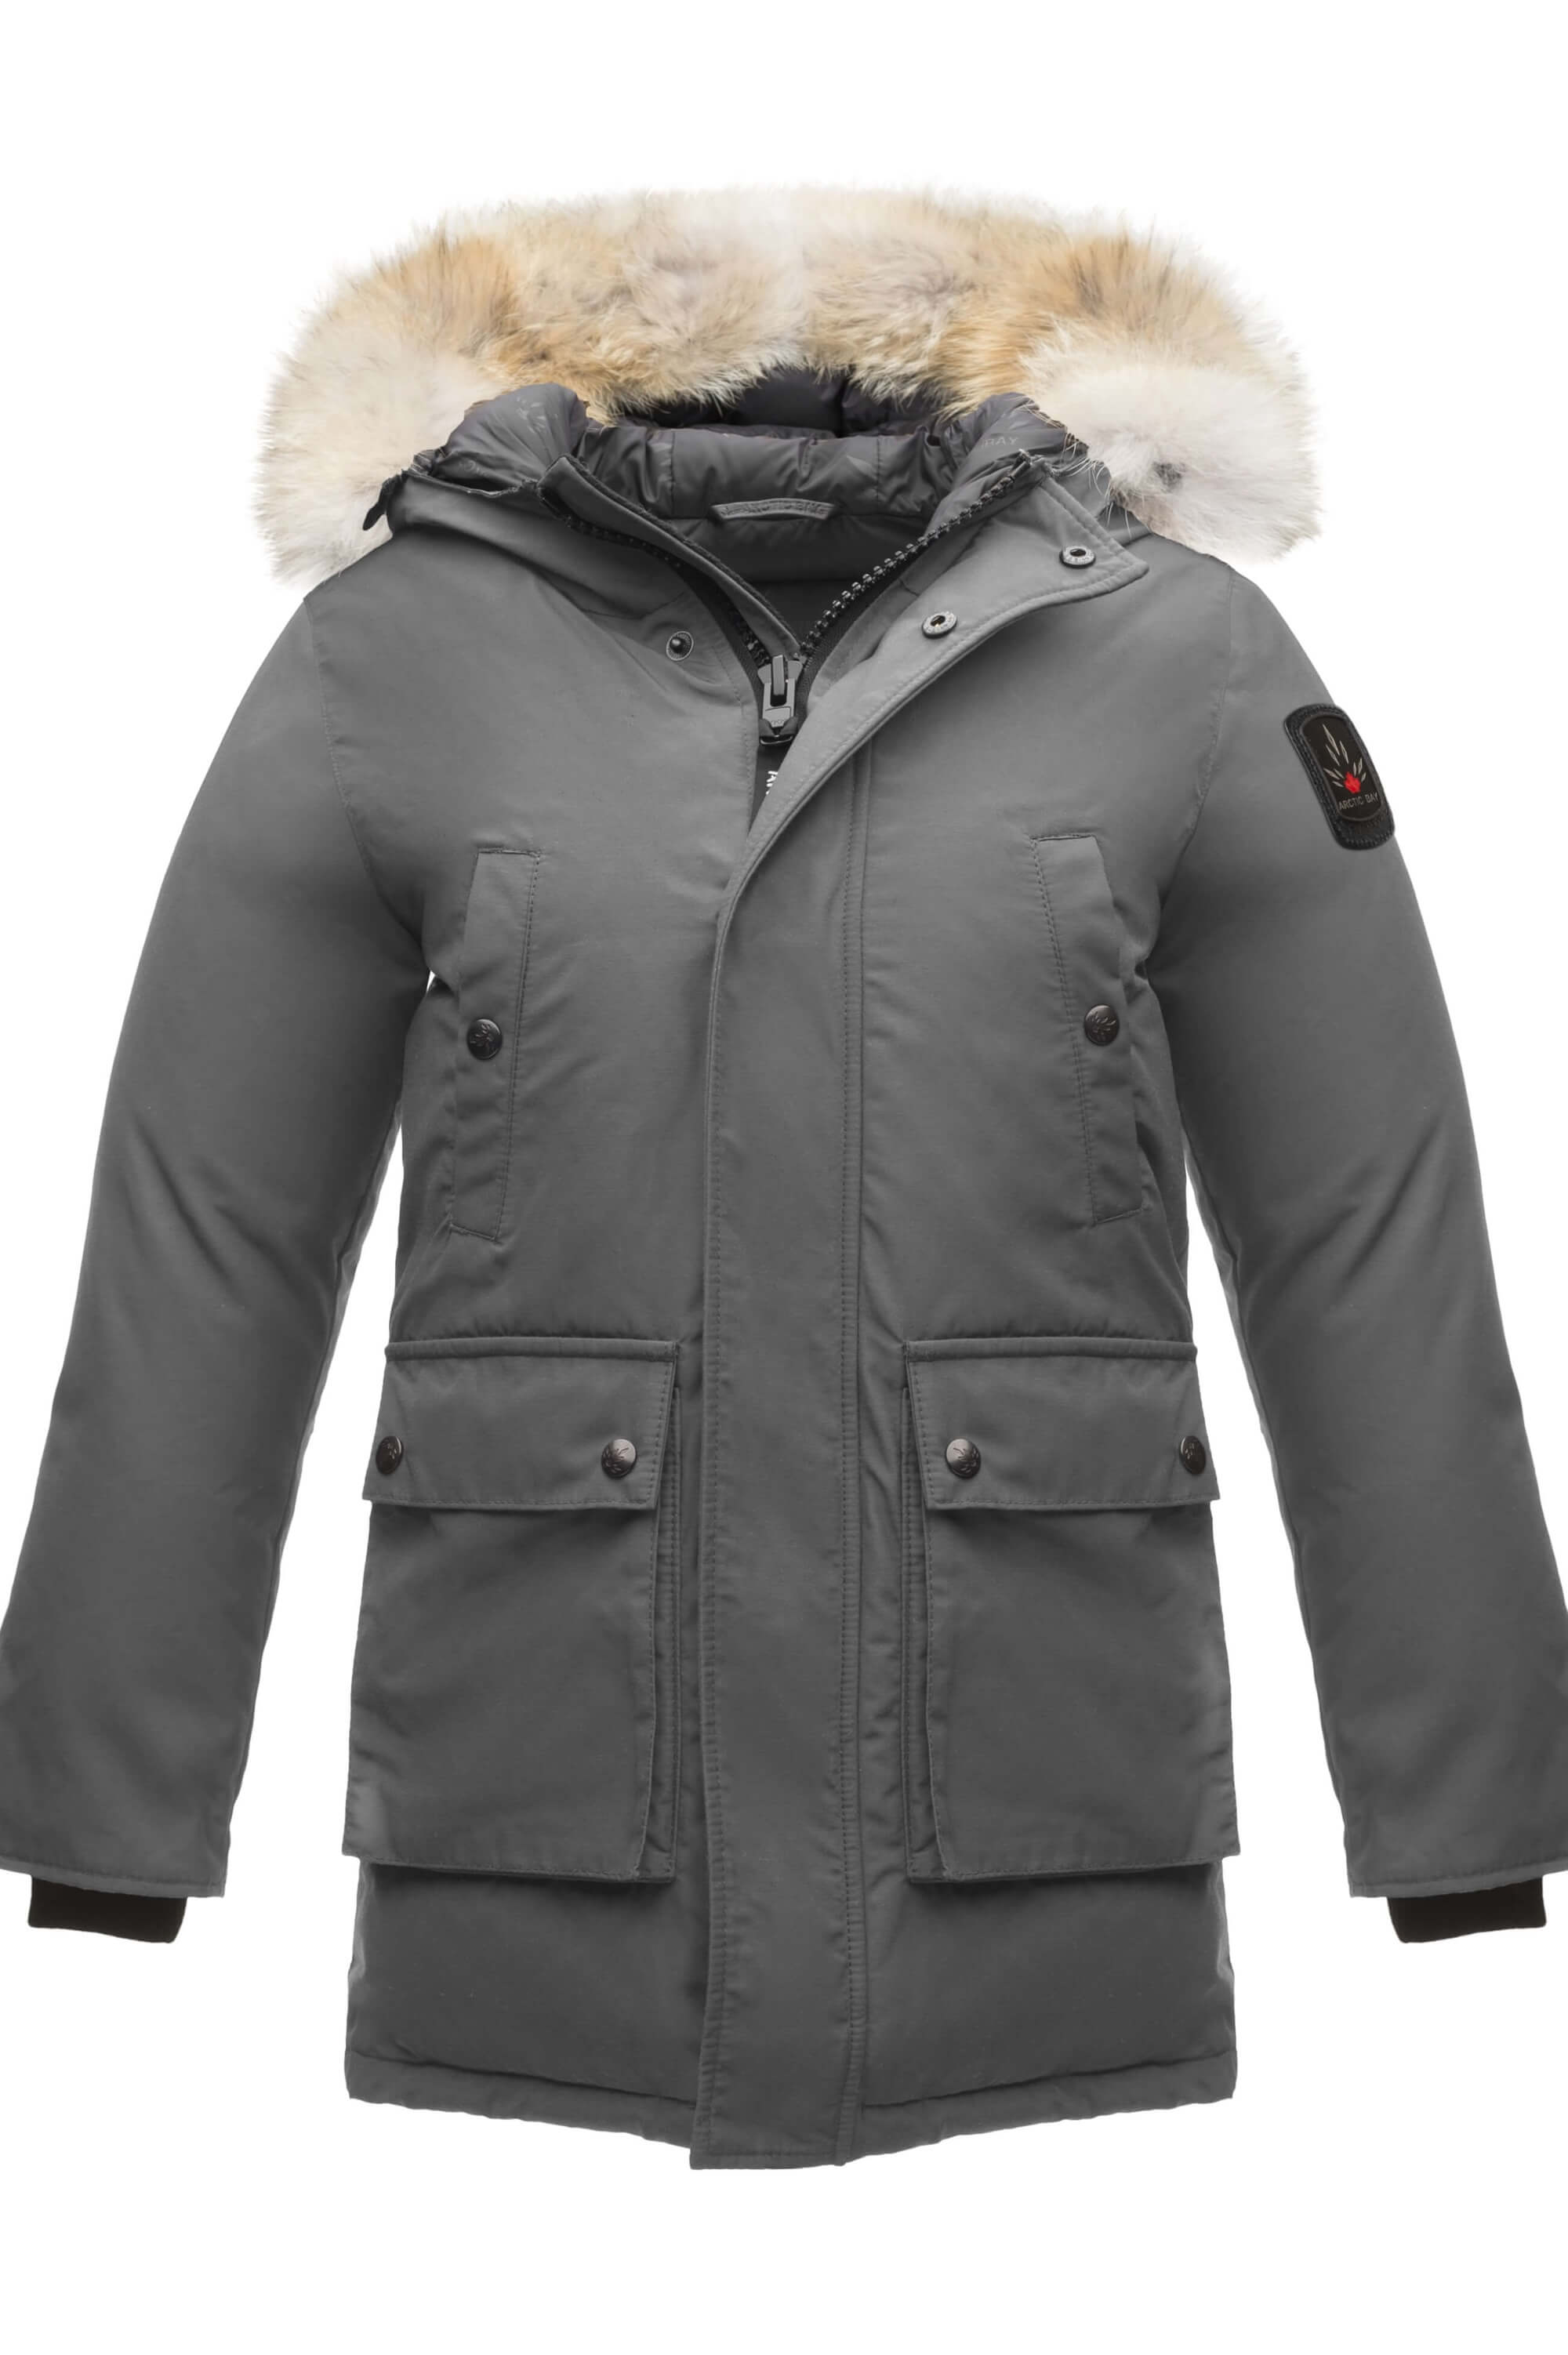 Rocky Parka for Kids | Kid's Down Parkas and Winter Coats - Arctic Bay